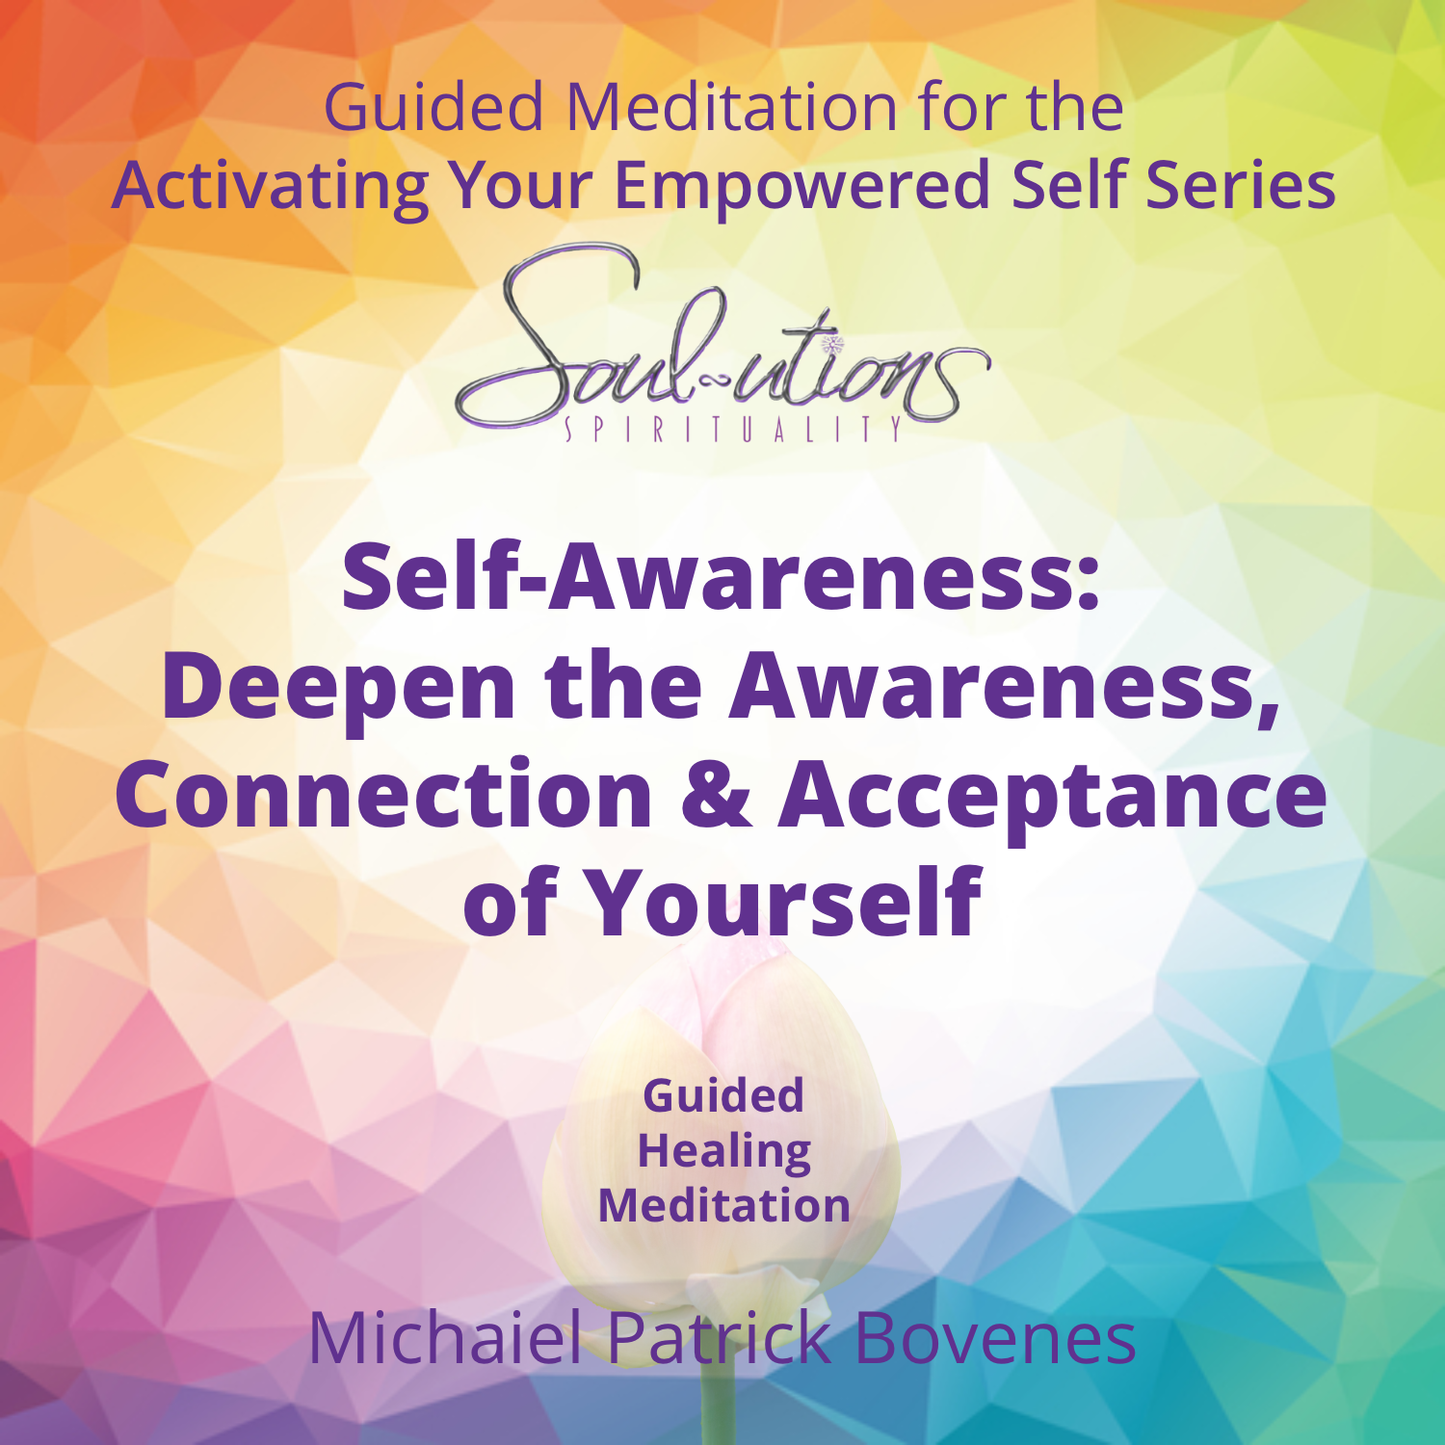 Deepen Awareness, Connection & Acceptance of Self • Meditation - •